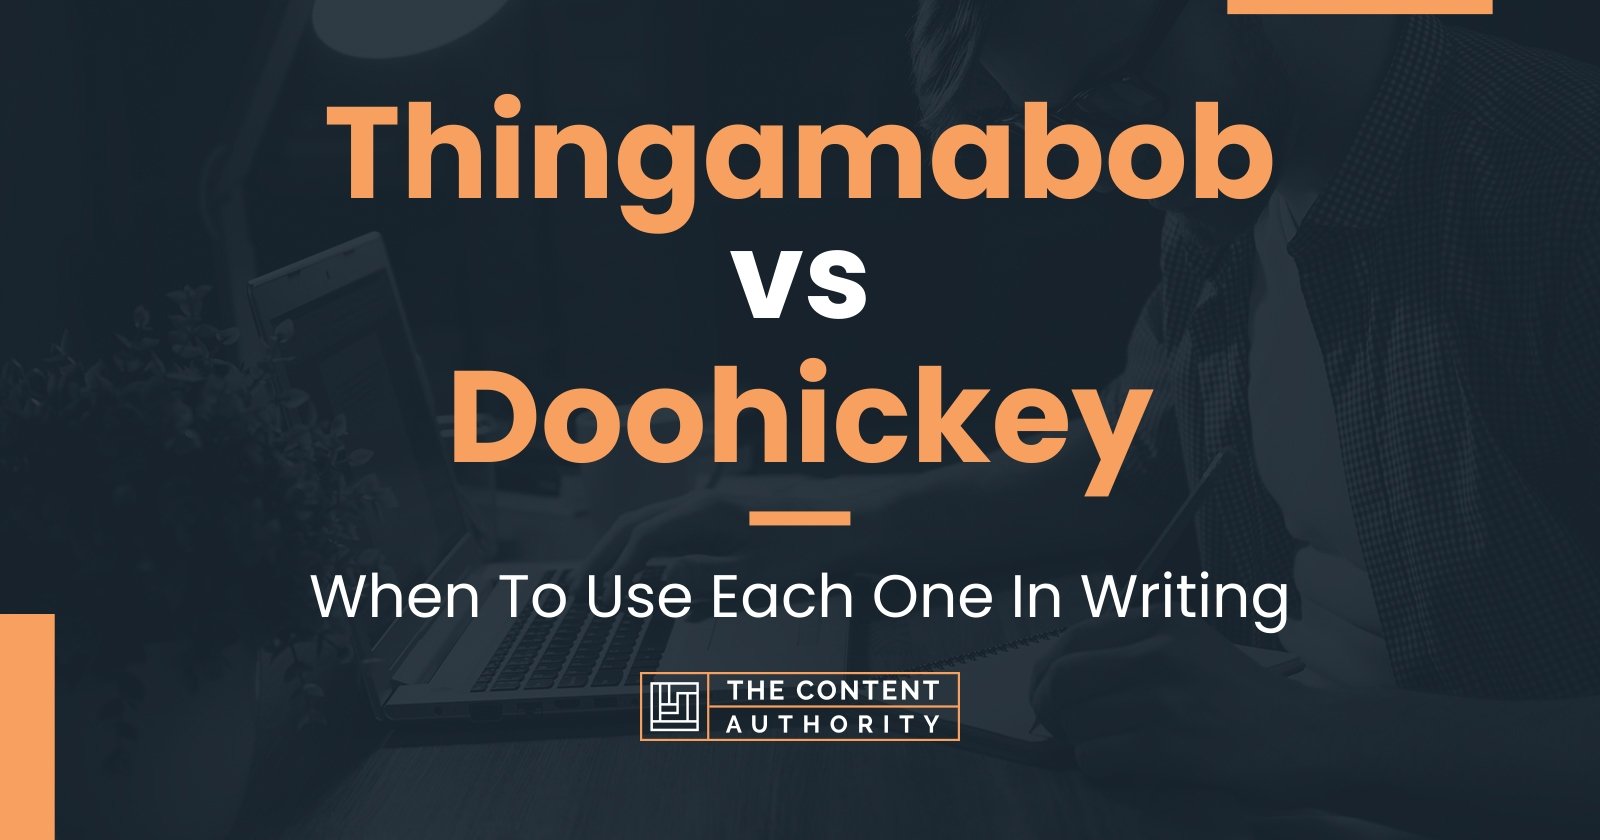 Thingamabob vs Doohickey: When To Use Each One In Writing